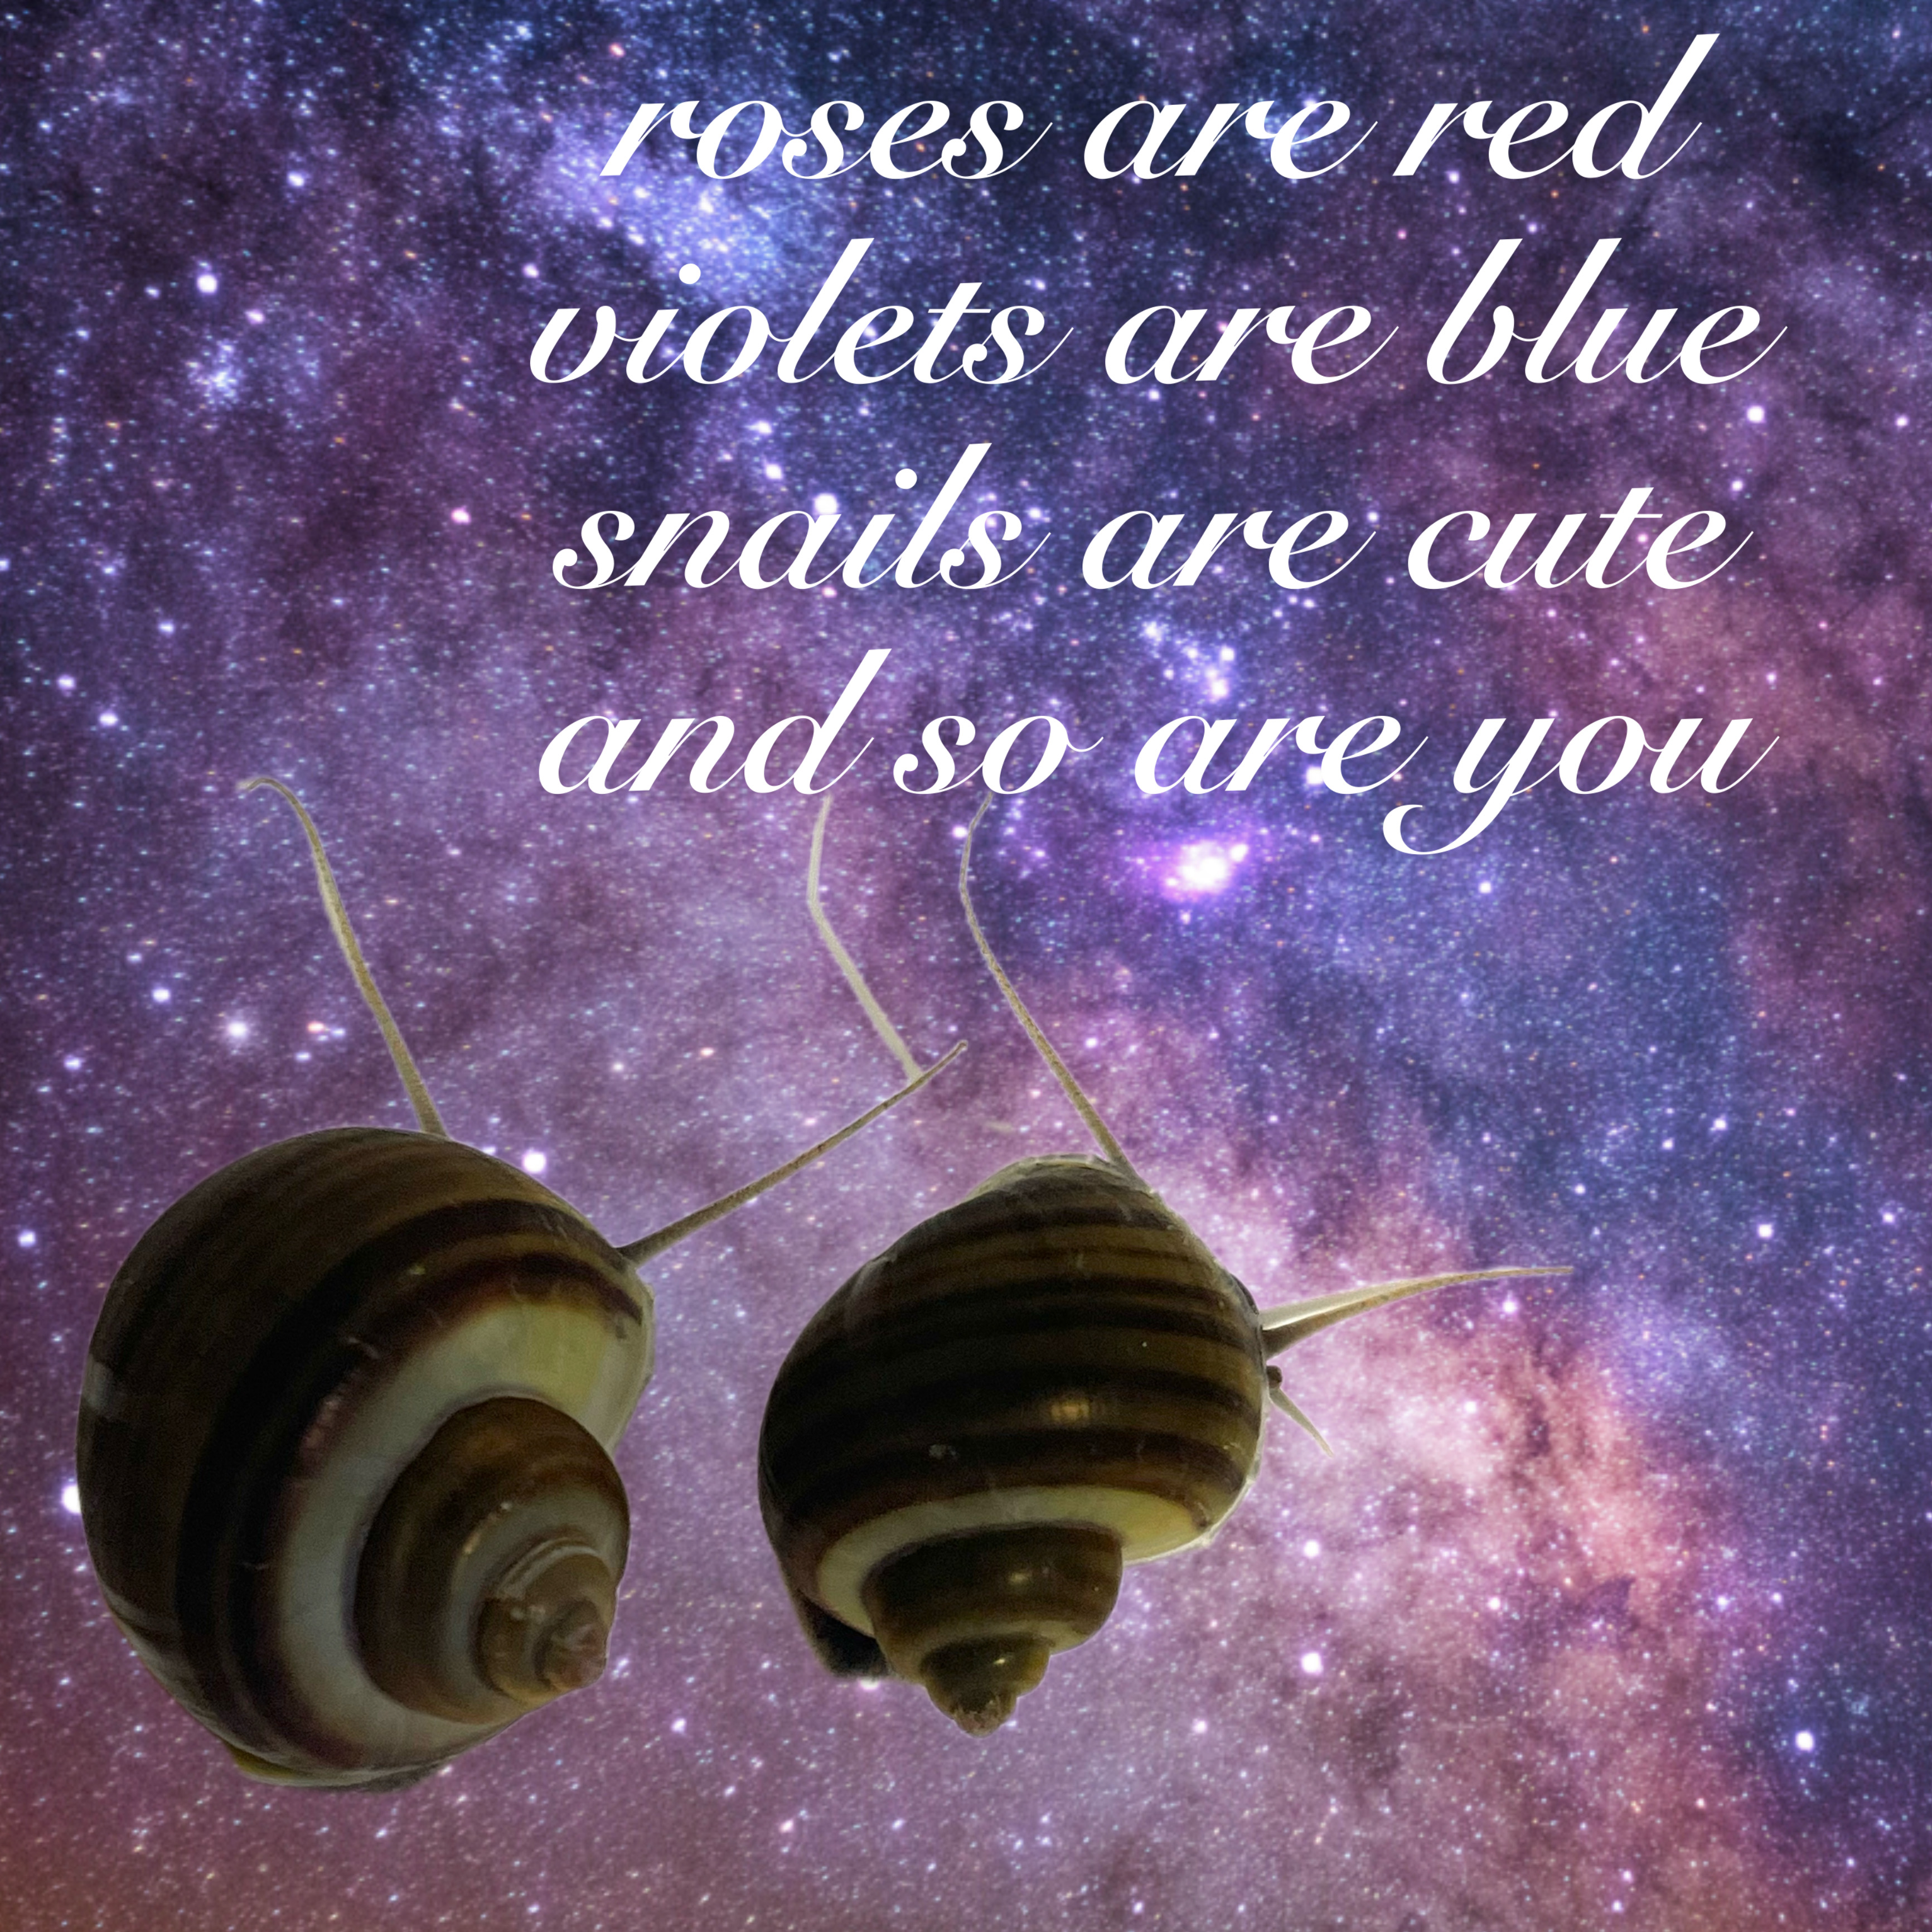 Two snails with brown shells and long antennae crawl across a galaxy background. Text reads, "roses are red, violets are blue, snails are cute, and so are you."